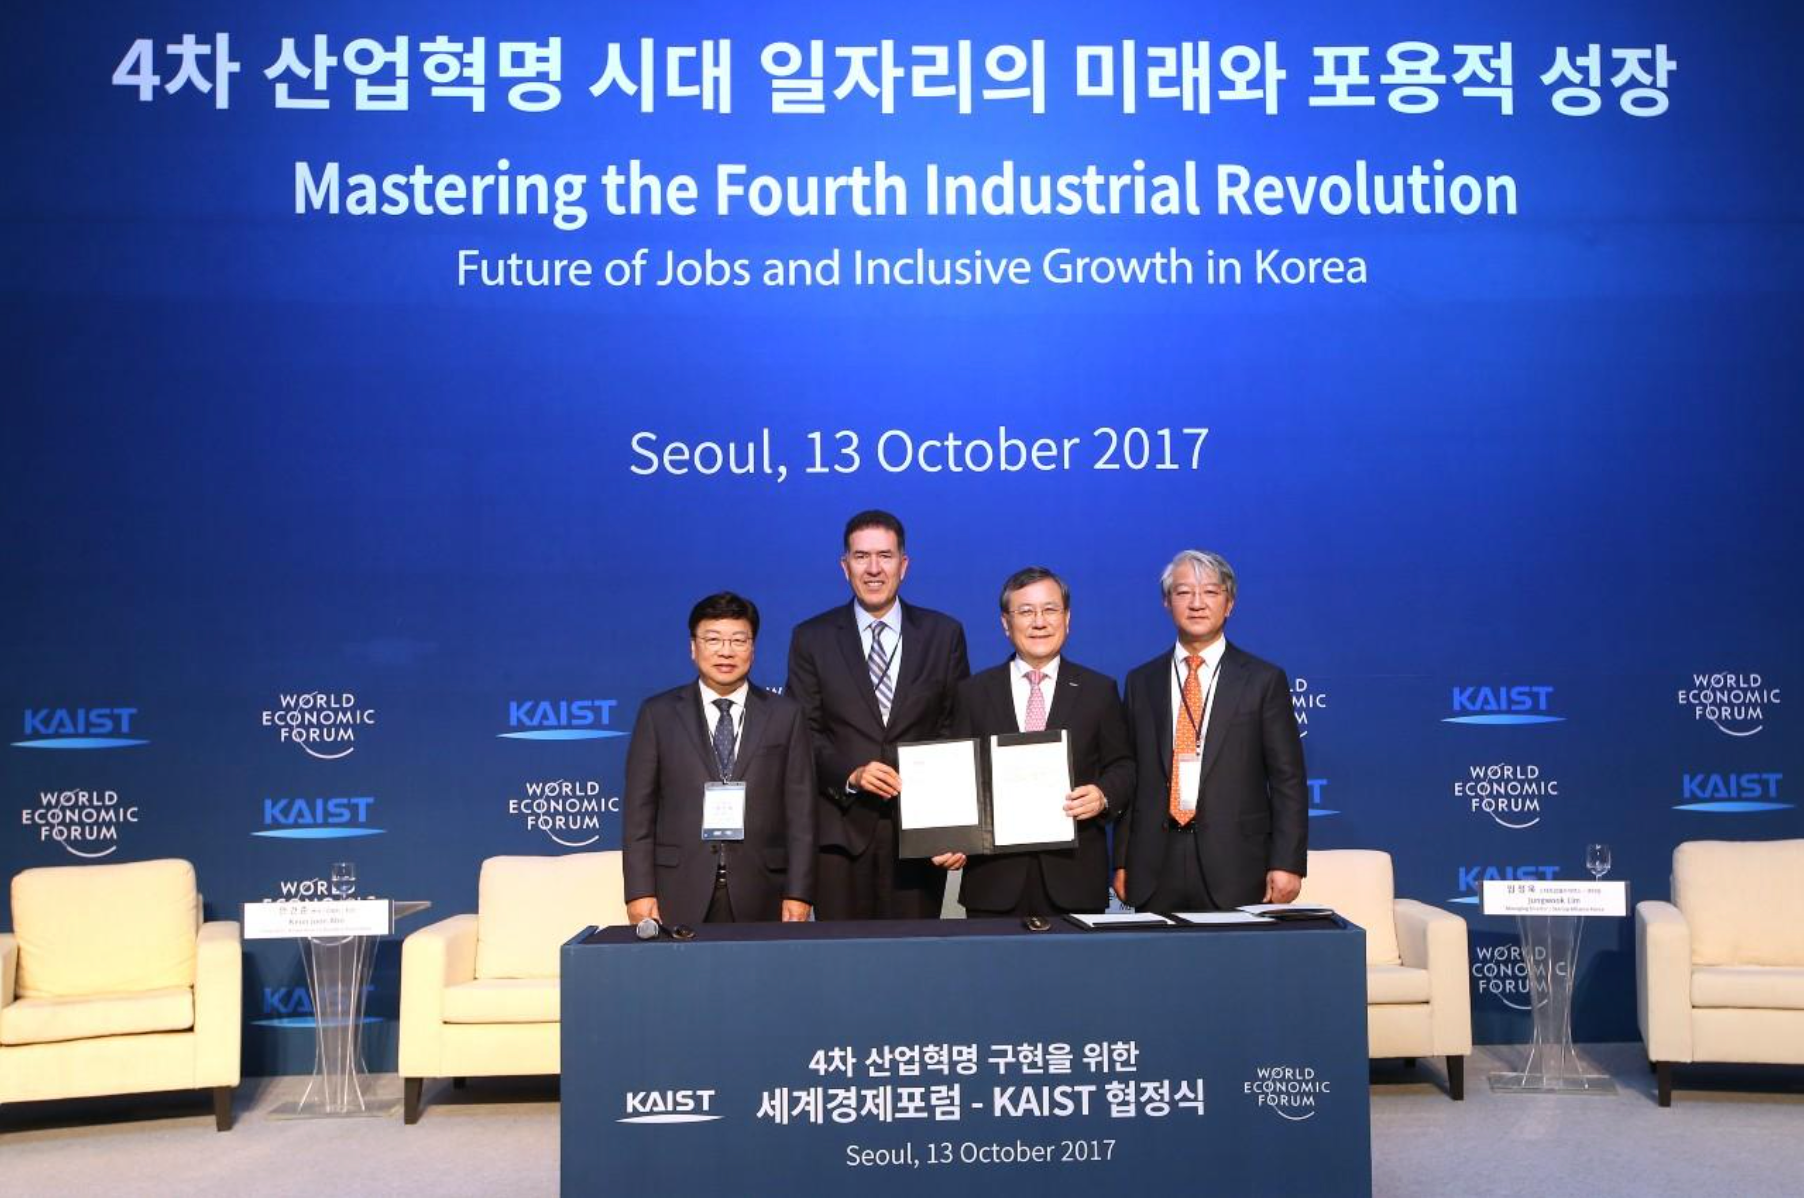 korea-policy-center-for-the-fourth-industrial-revolution-kpc4ir-02